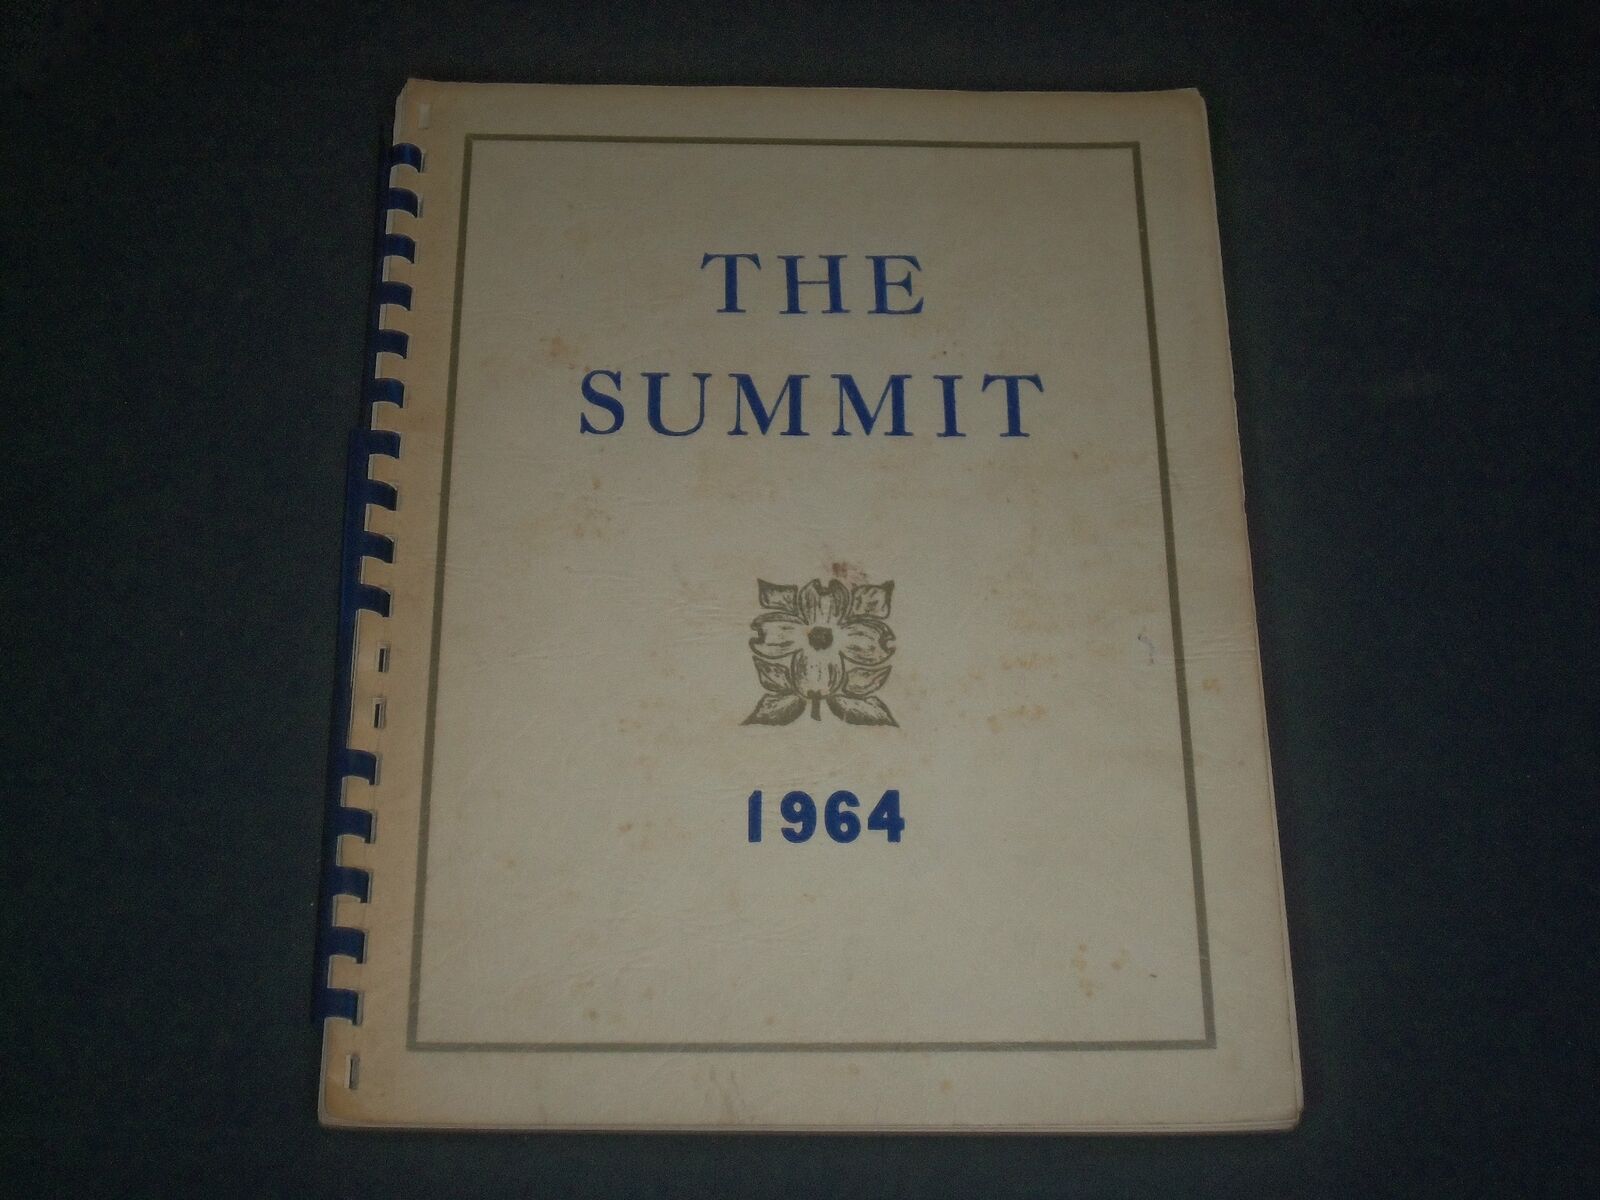 1964 THE SUMMIT NORWOOD PUBLIC SCHOOL YEARBOOK - NORWOOD NEW JERSEY - YB 1667